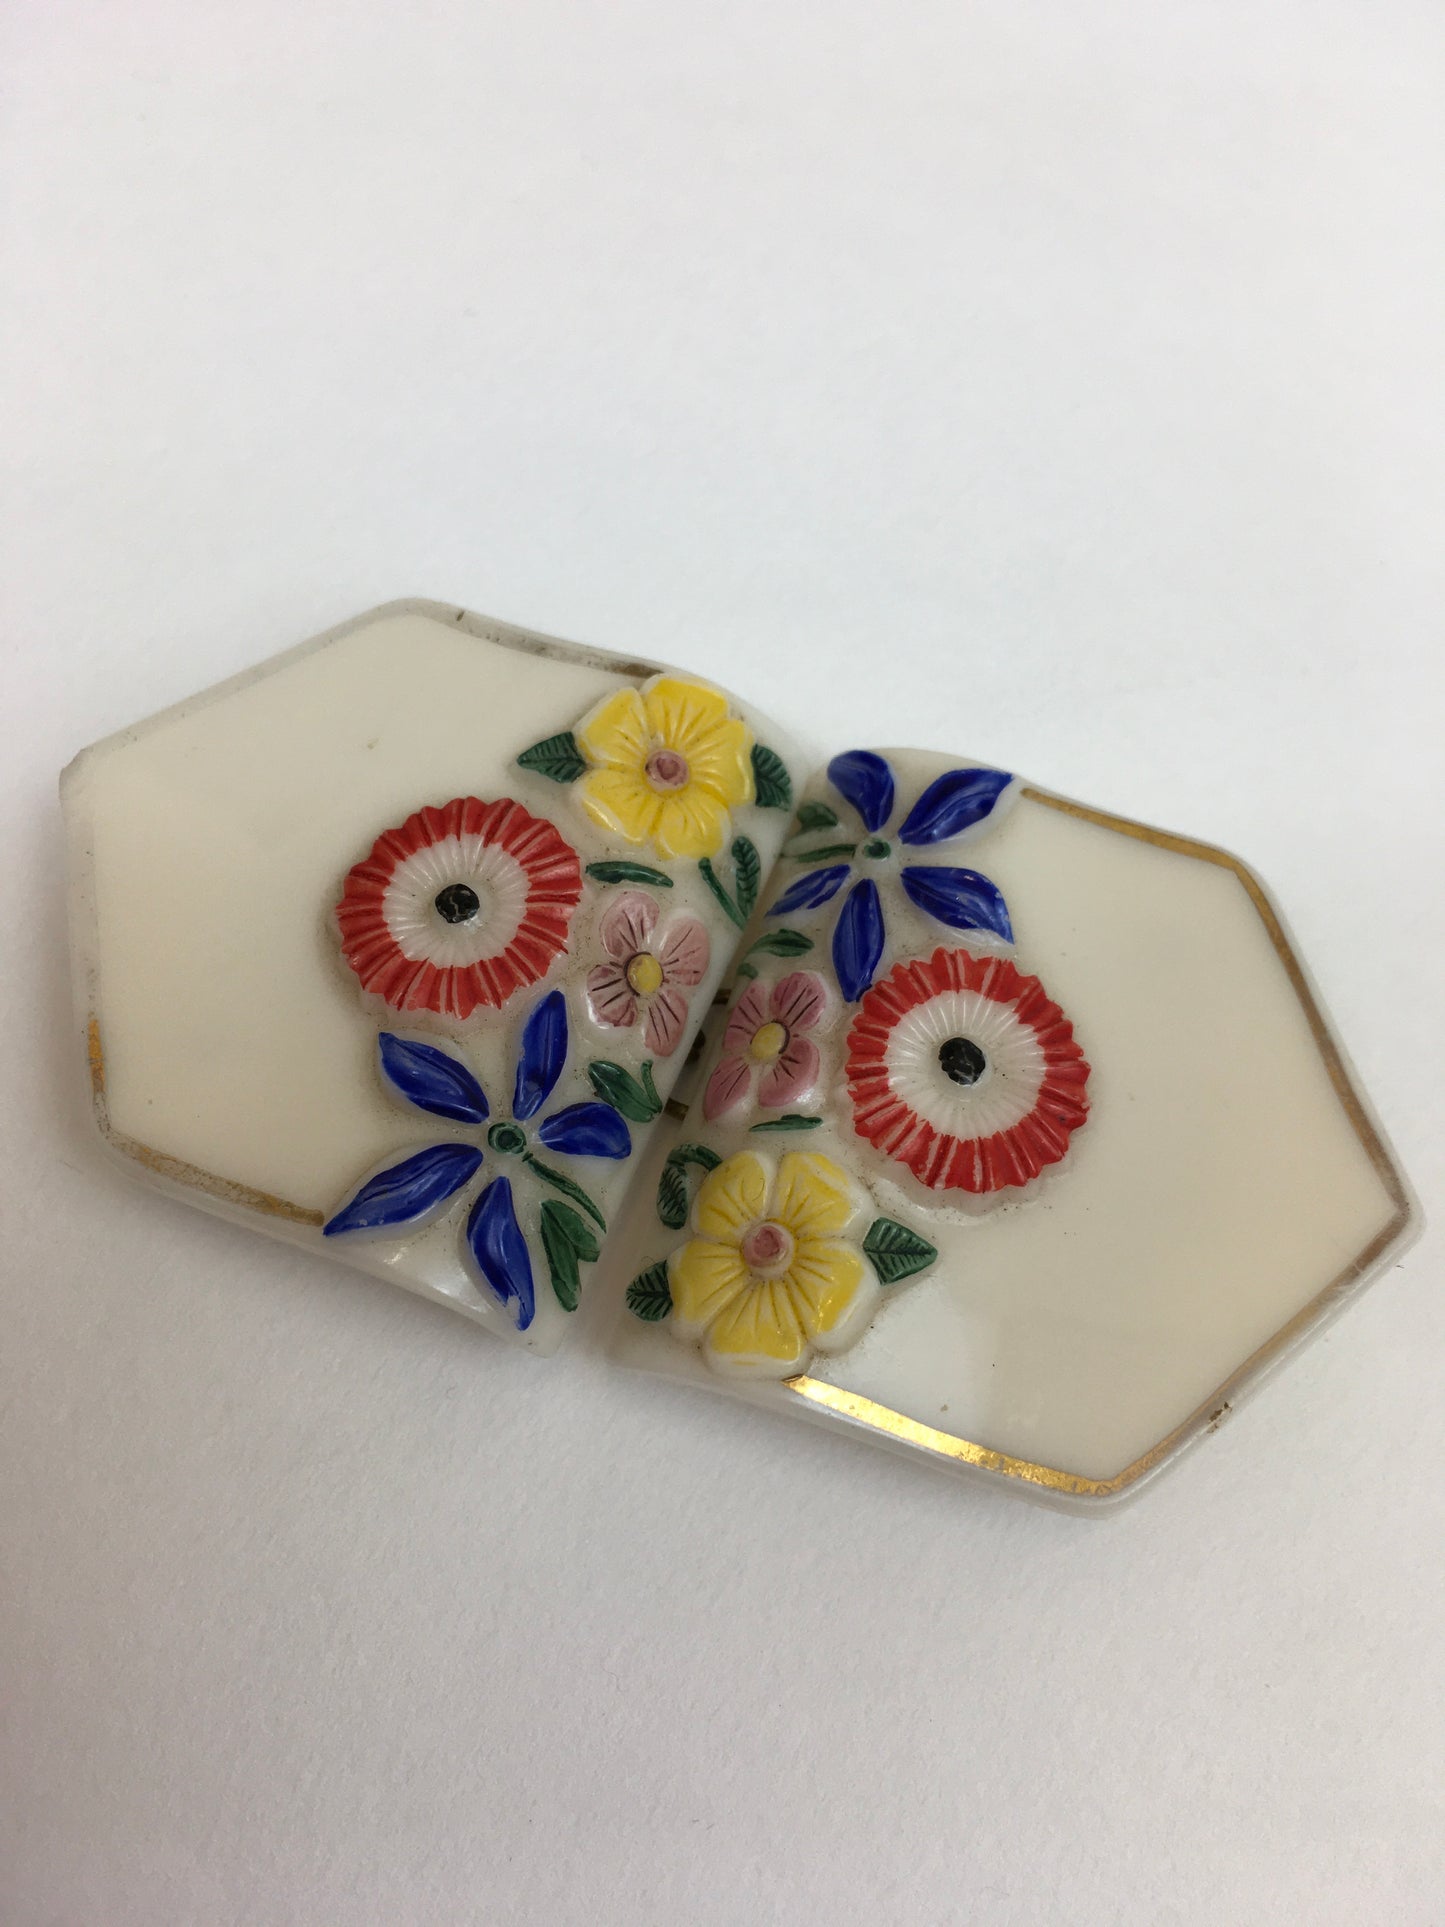 Original 1930’s Beautiful Milk Glass Buckle - With Florals in Brights and Faded Gilding